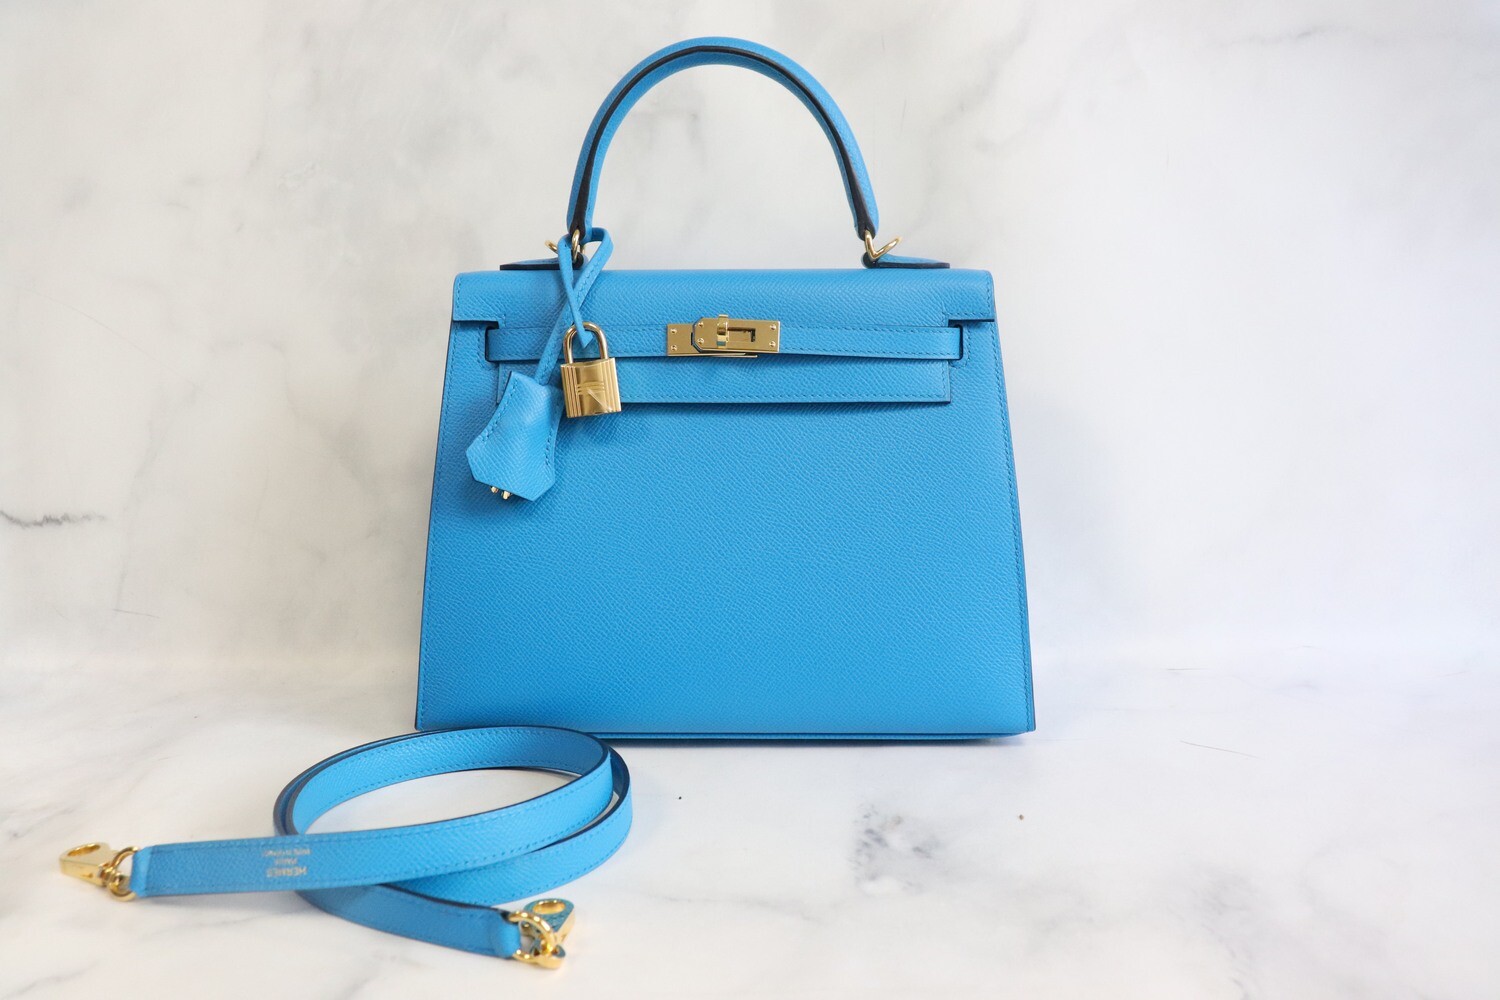 Hermes Kelly 25 Blue Frida With Gold Hardware, Preowned In Box, Z Stamp -  Julia Rose Boston